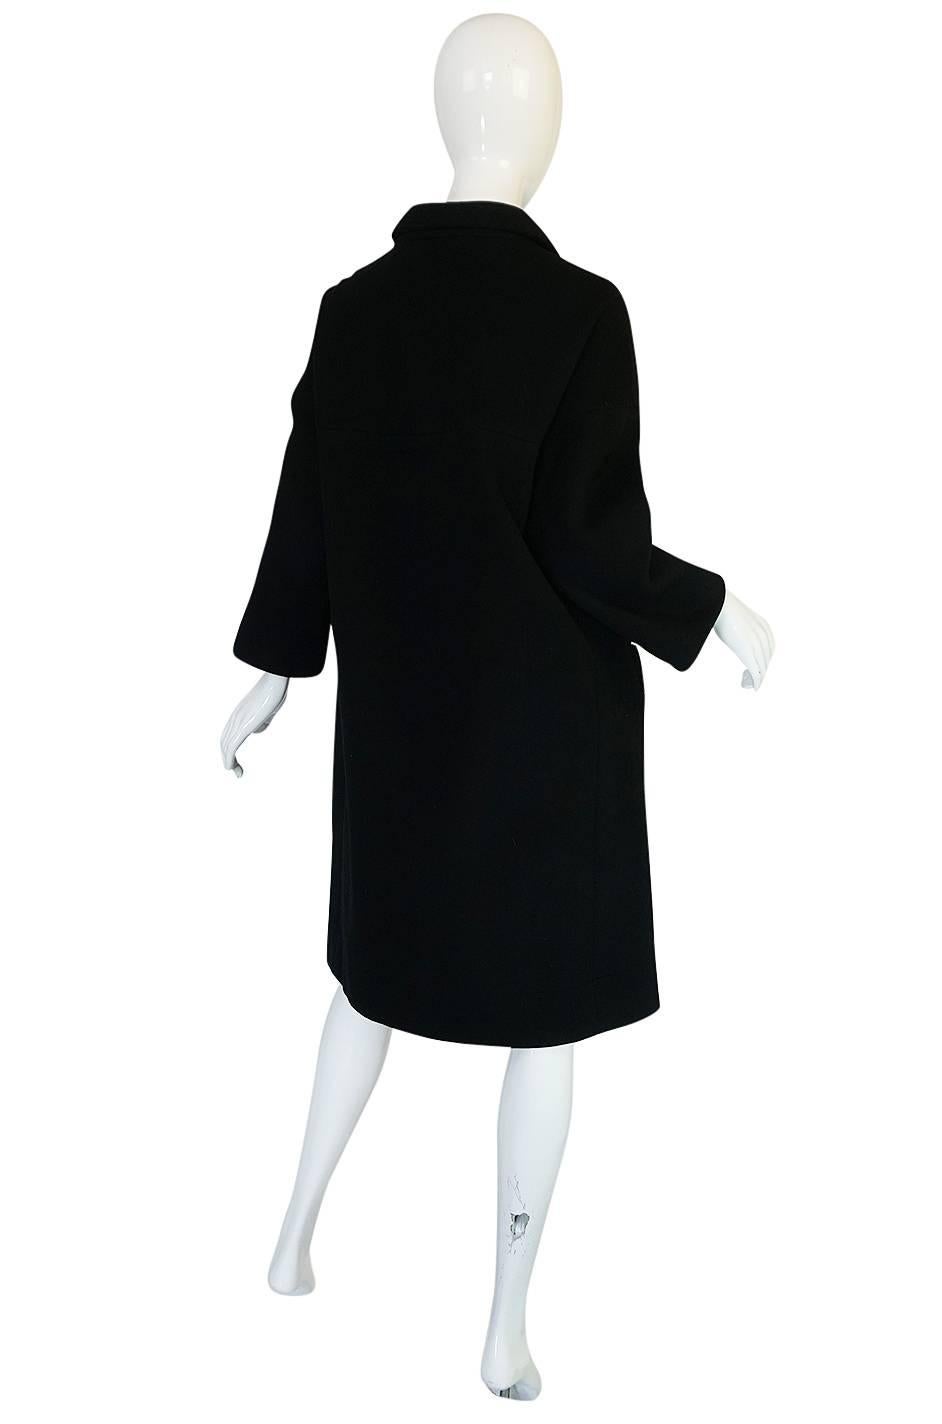 This coat is extraordinary. It dates to approx the 1962-63 Haute Couture collection and is impeccable. A similar coat is held in The Metropolitan Museum permanent archives (reference photo to the left). Cristobal Balenciaga was known for his fine